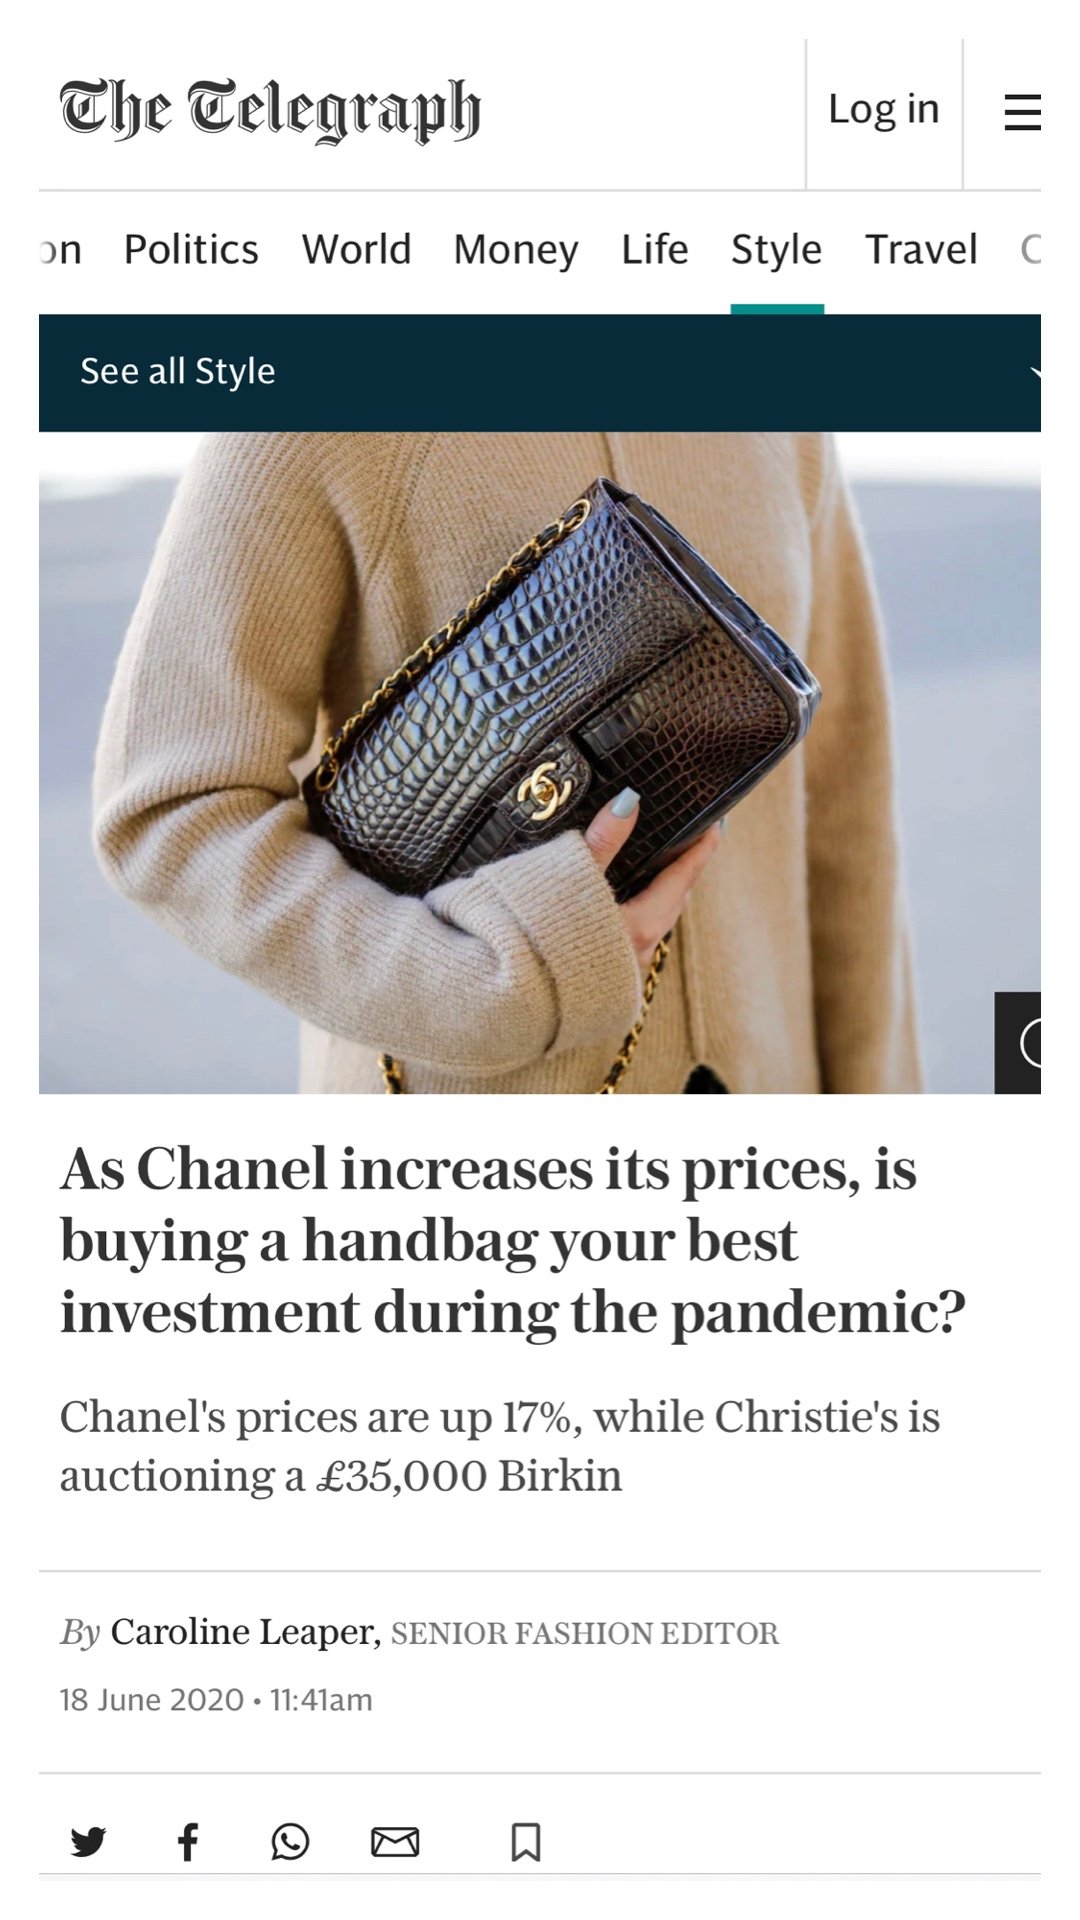 Telegraph article on investing in handbags